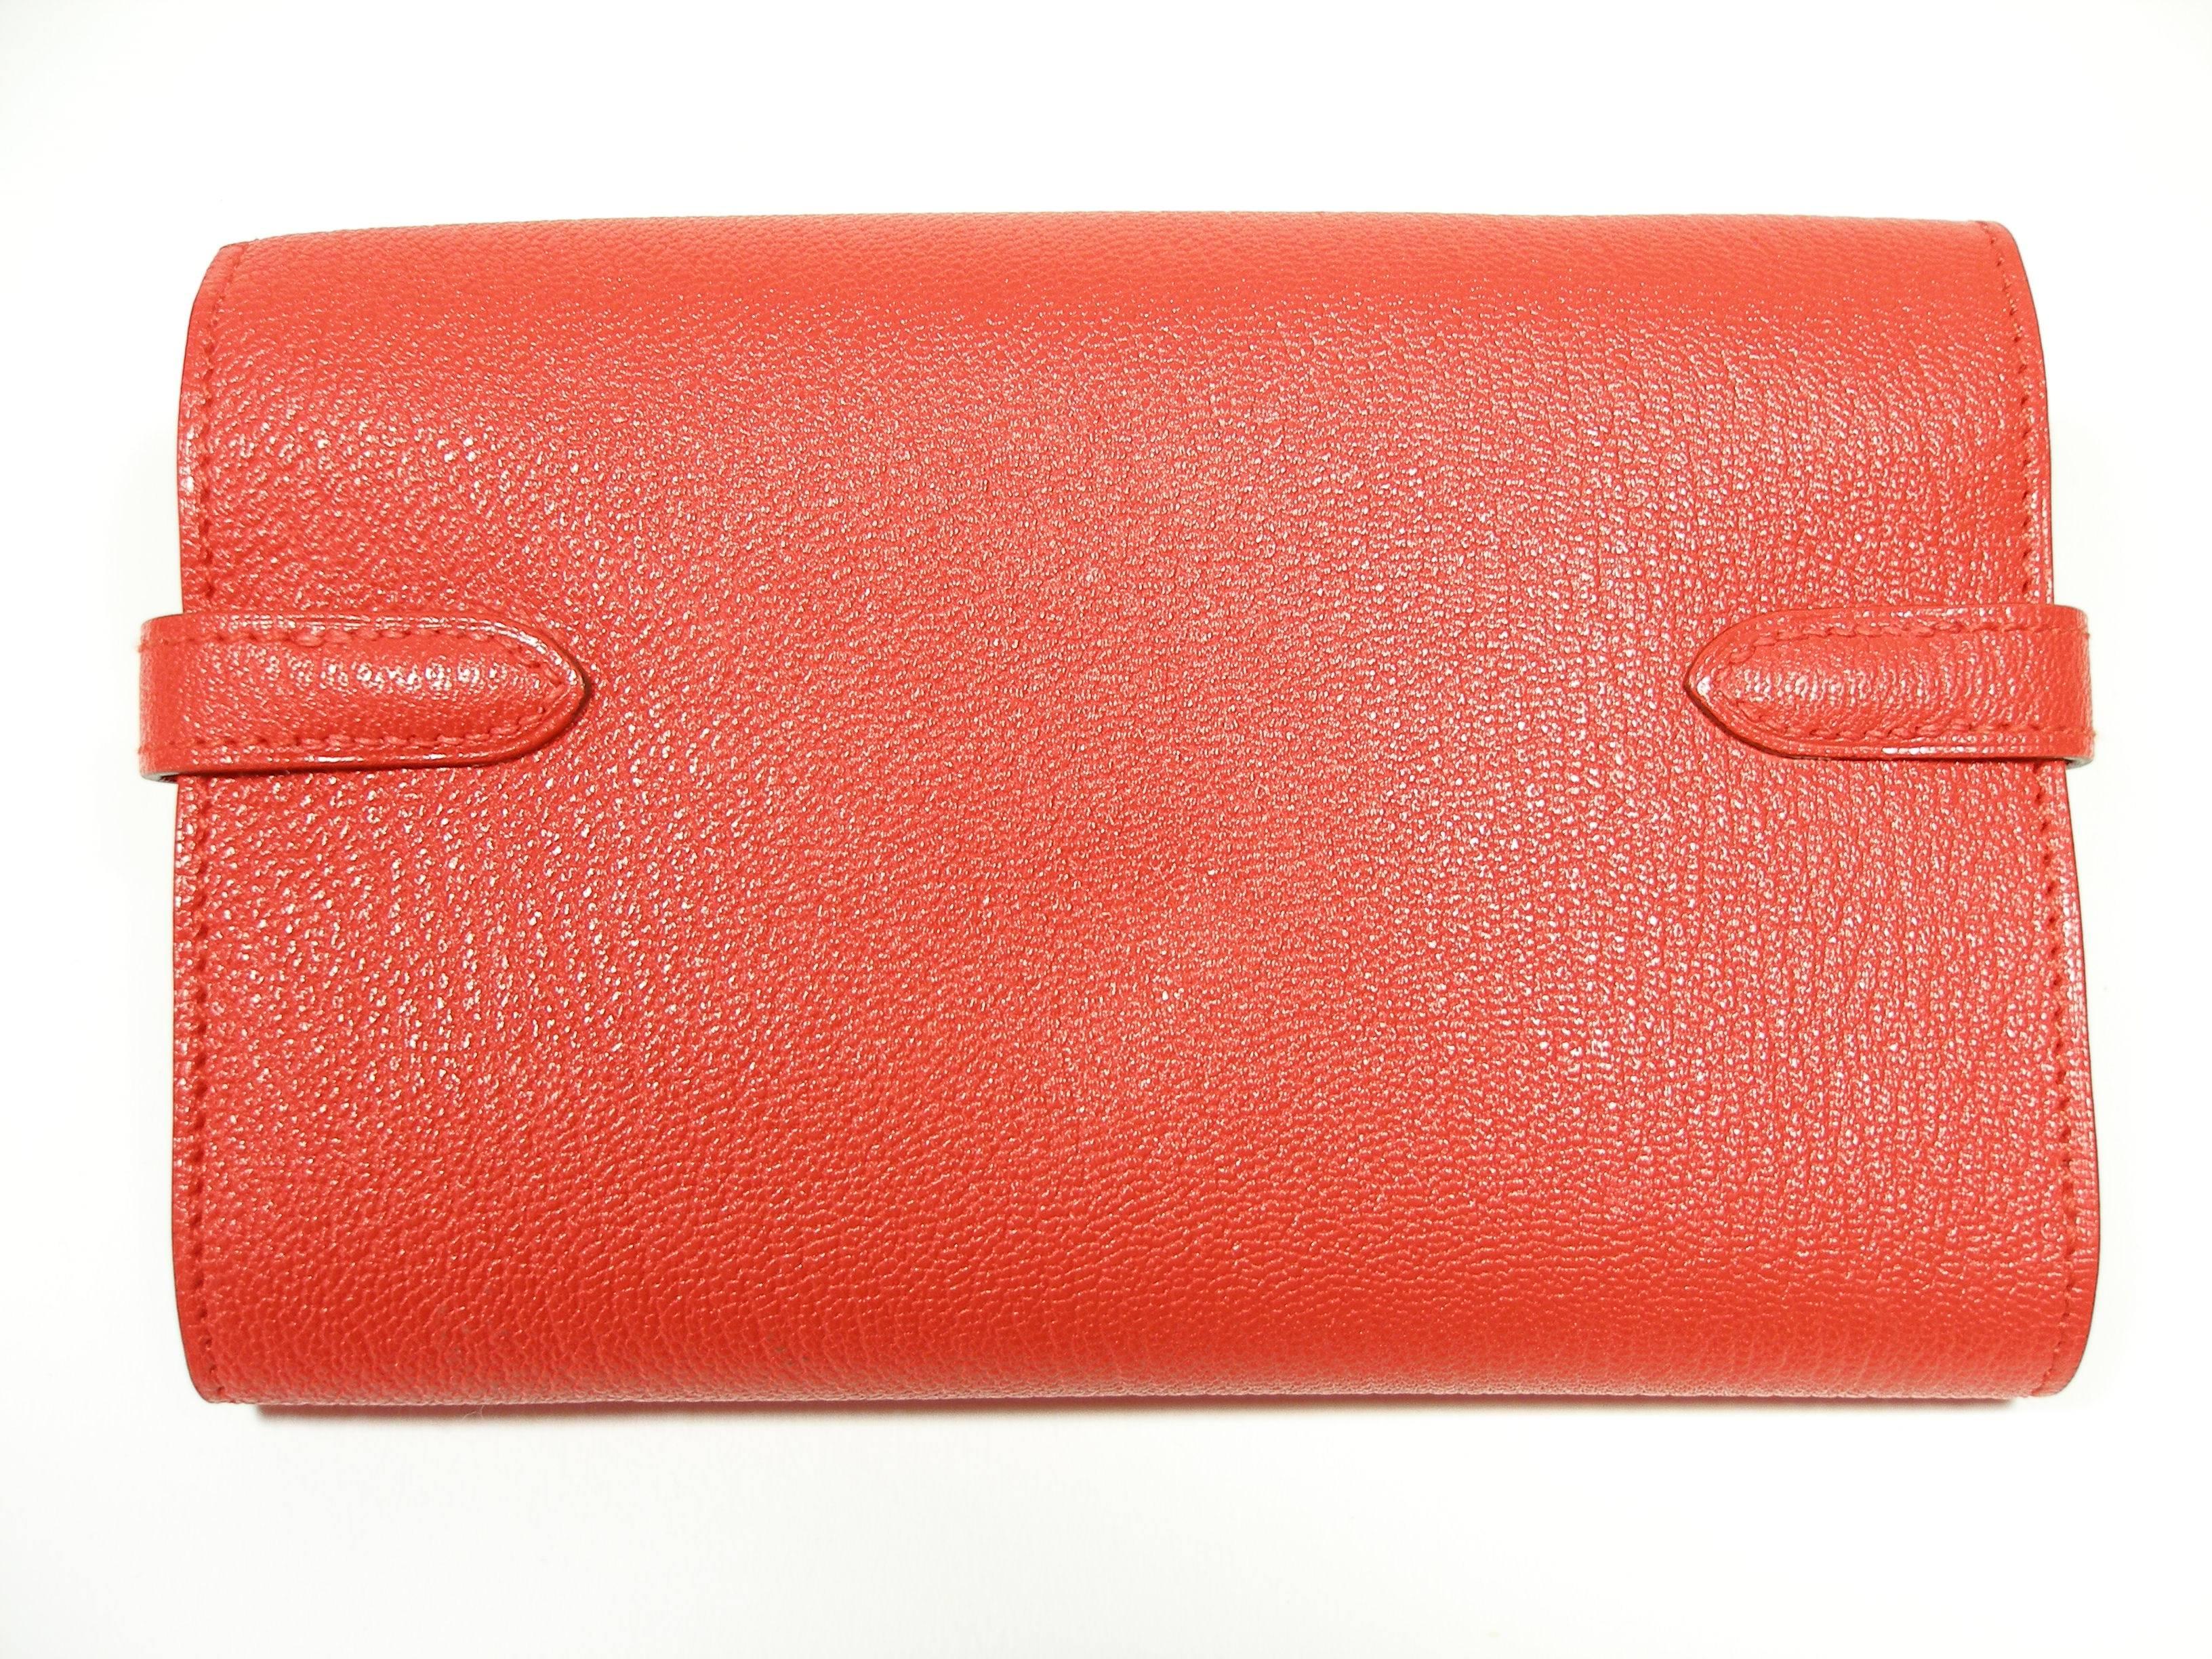 Hermès Kelly Compact Wallet Chevre Mysore Leather Rouge Tomate  / BN 3